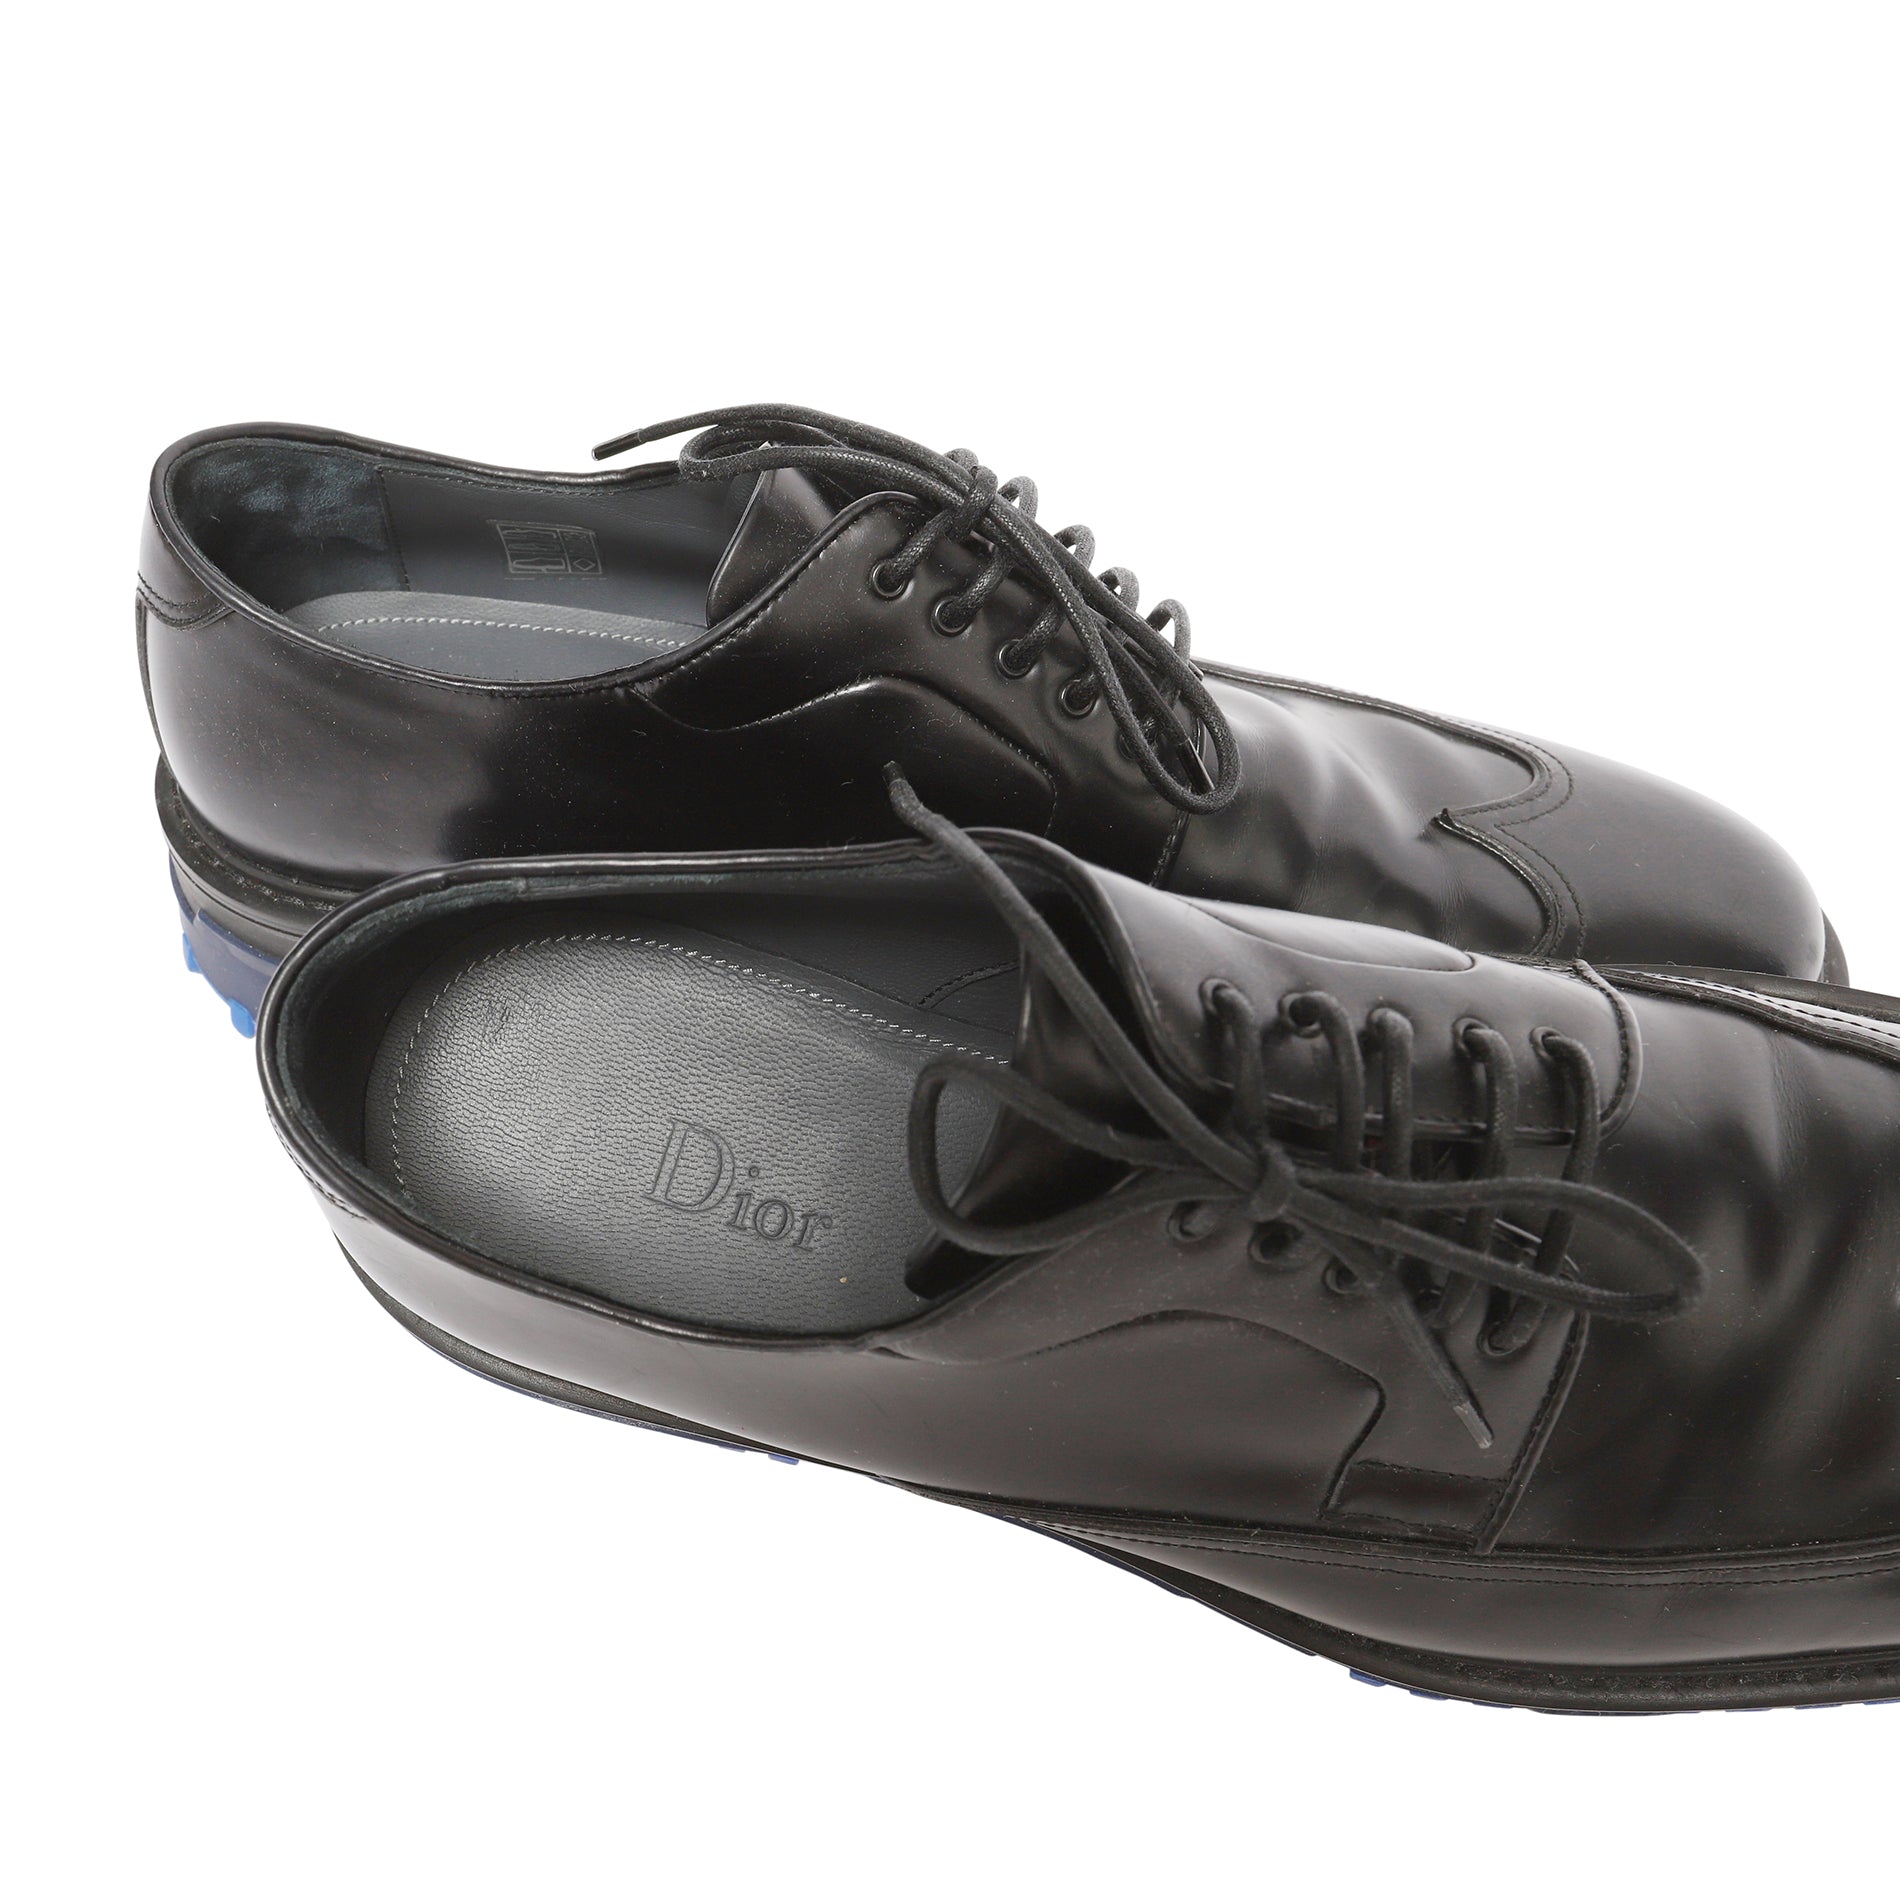 Dior Homme FW15 Contrast Sole Brogues - Ākaibu Store